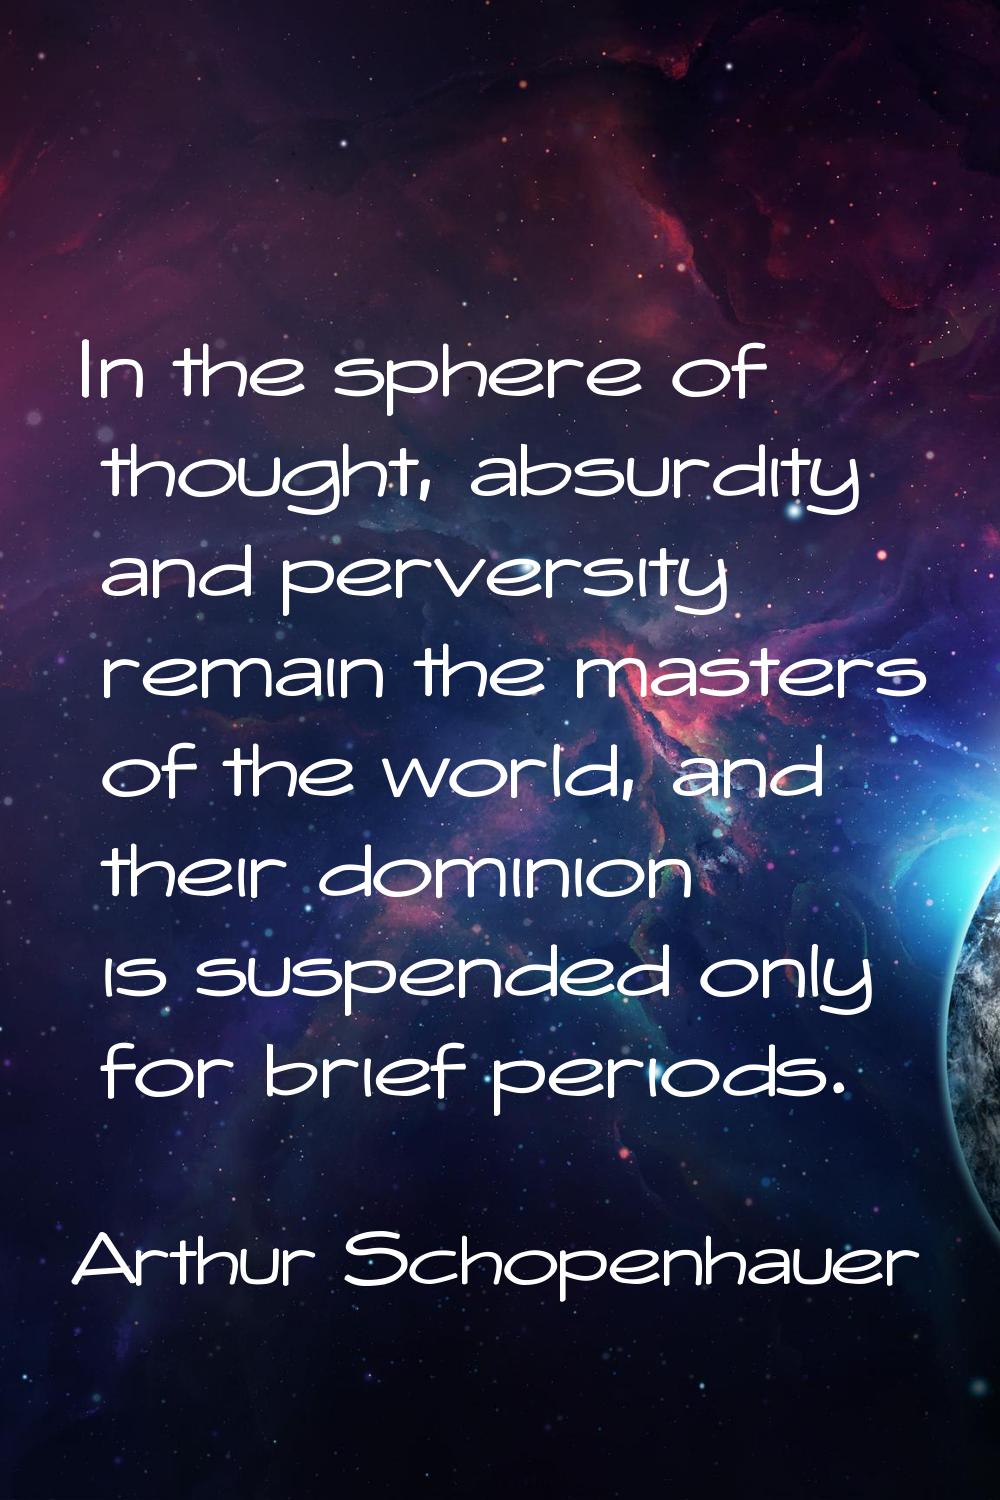 In the sphere of thought, absurdity and perversity remain the masters of the world, and their domin